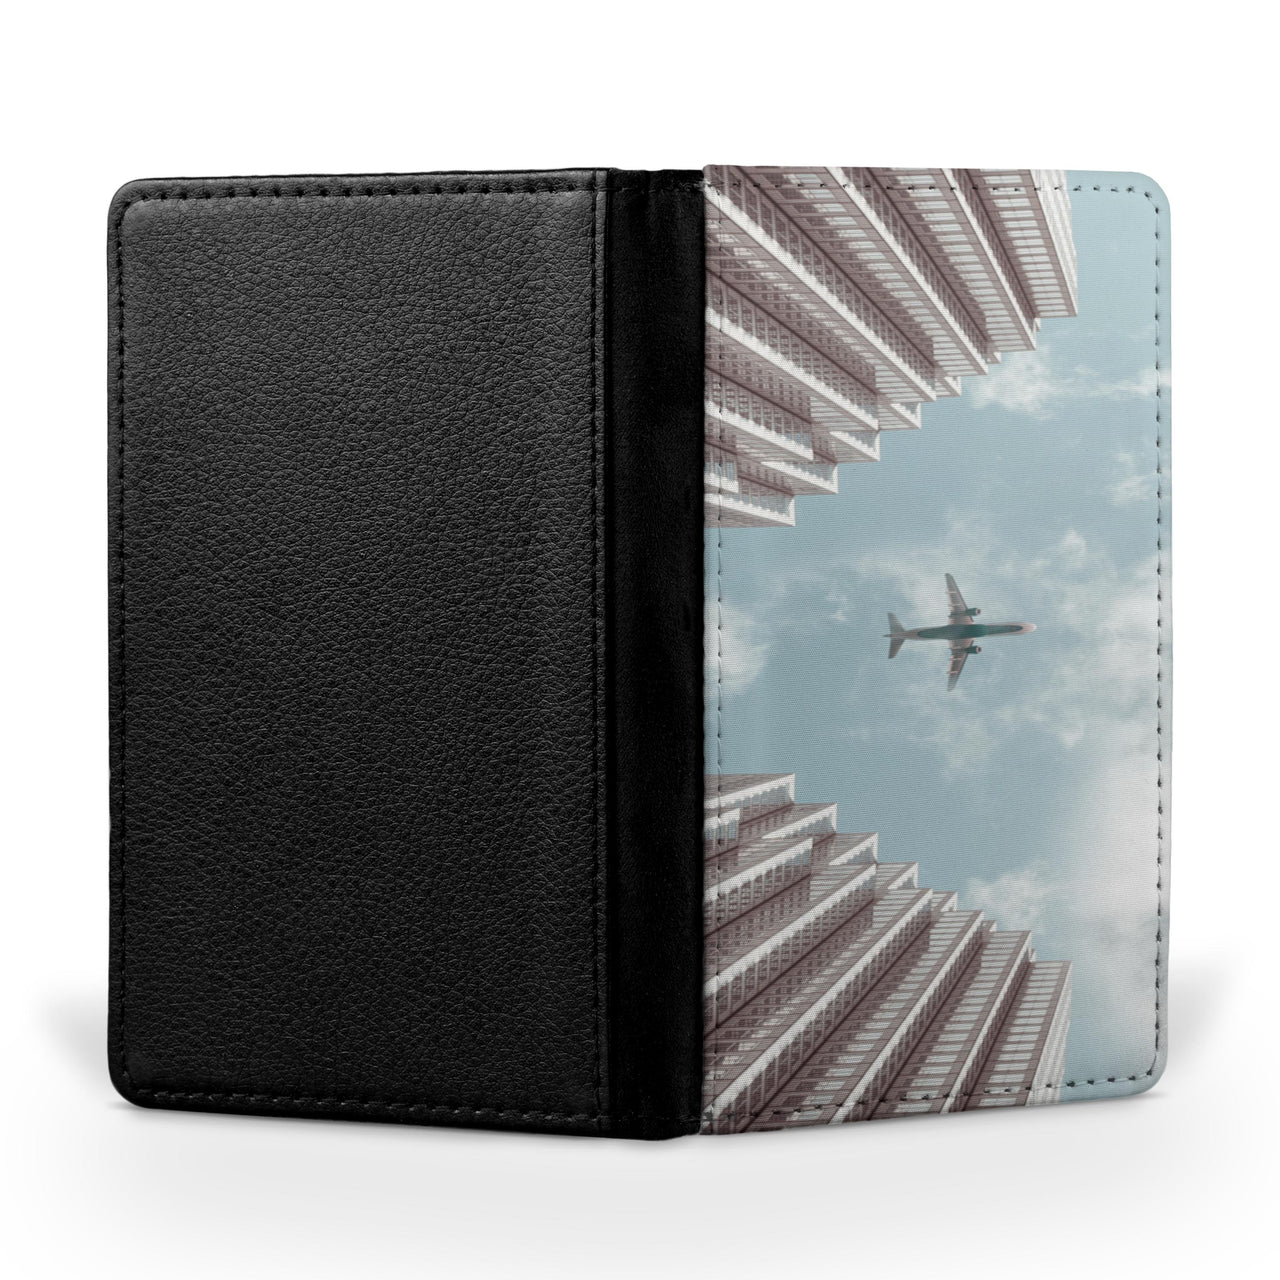 Airplane Flying Over Runway Printed Passport & Travel Cases